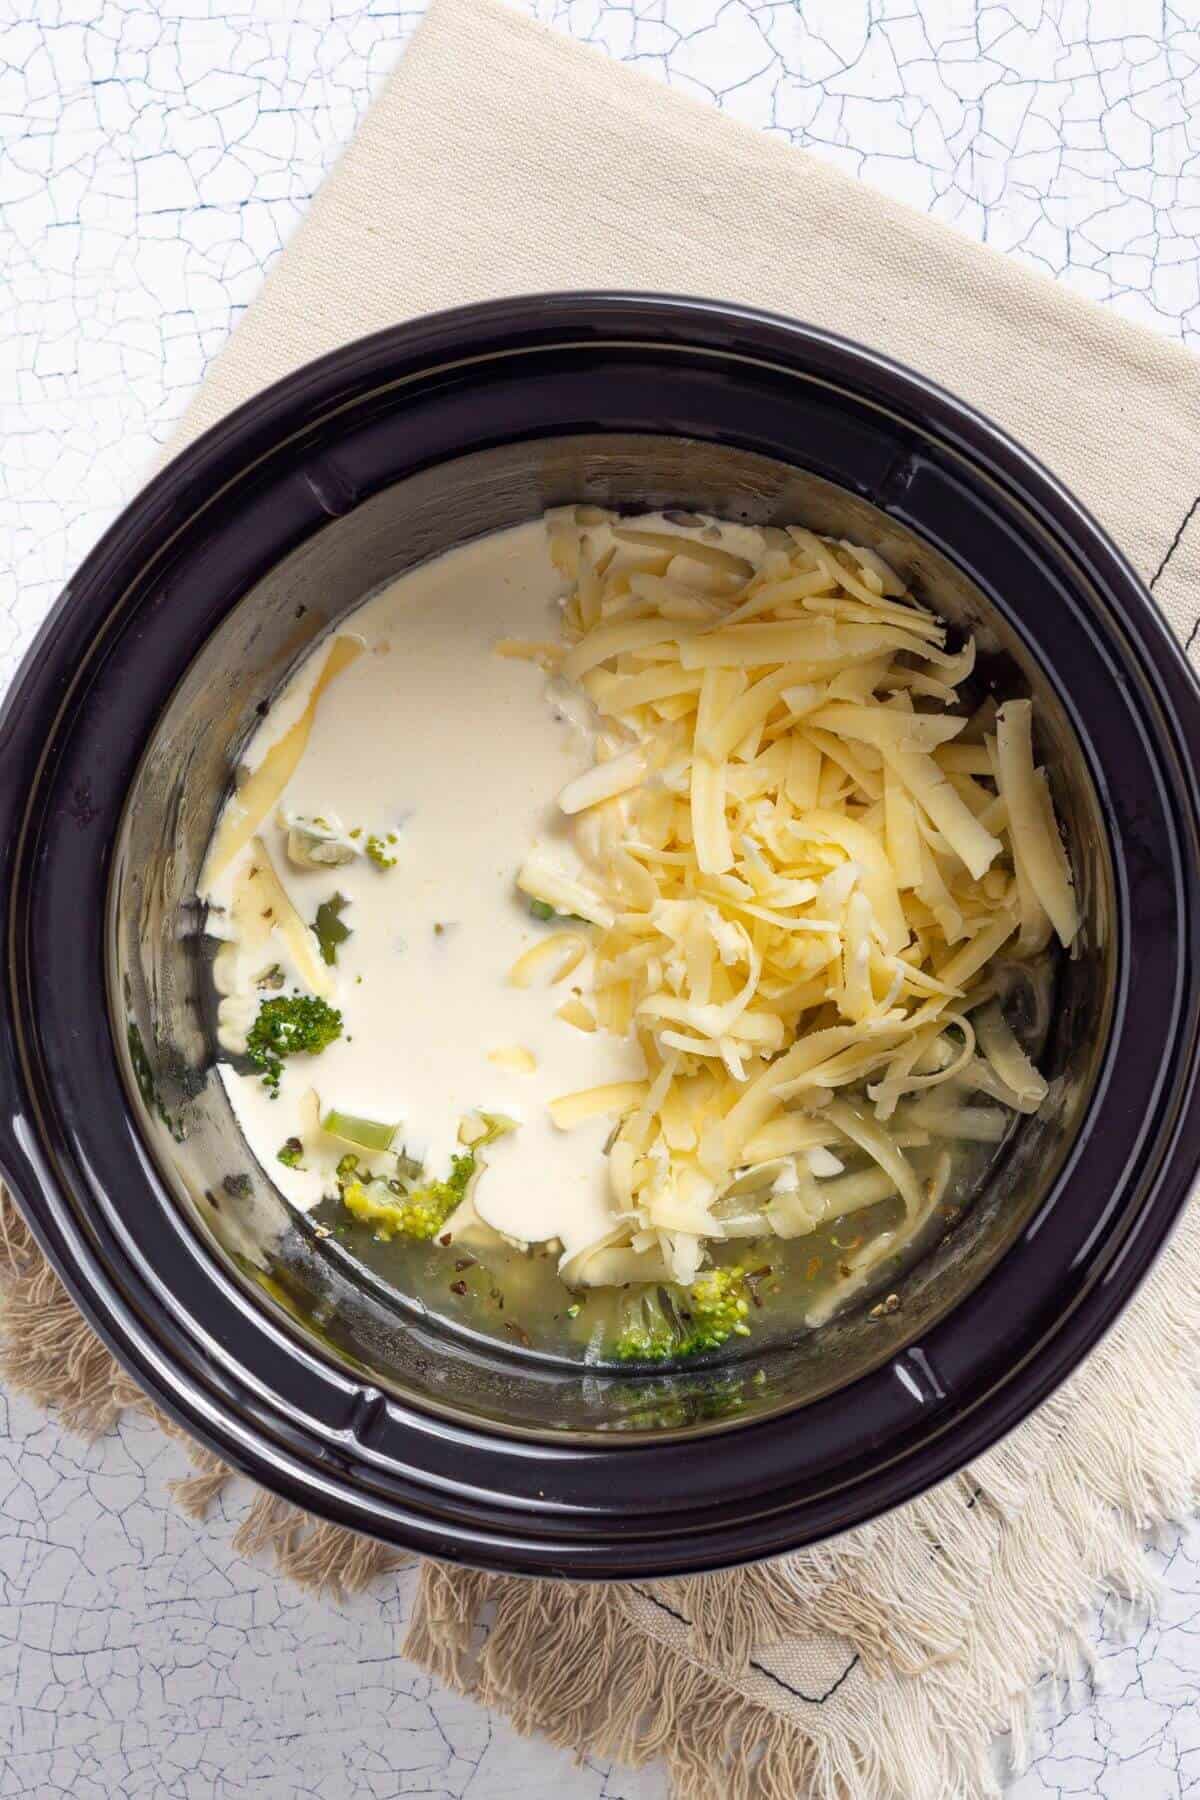 A crock pot with cheese and cream in it.